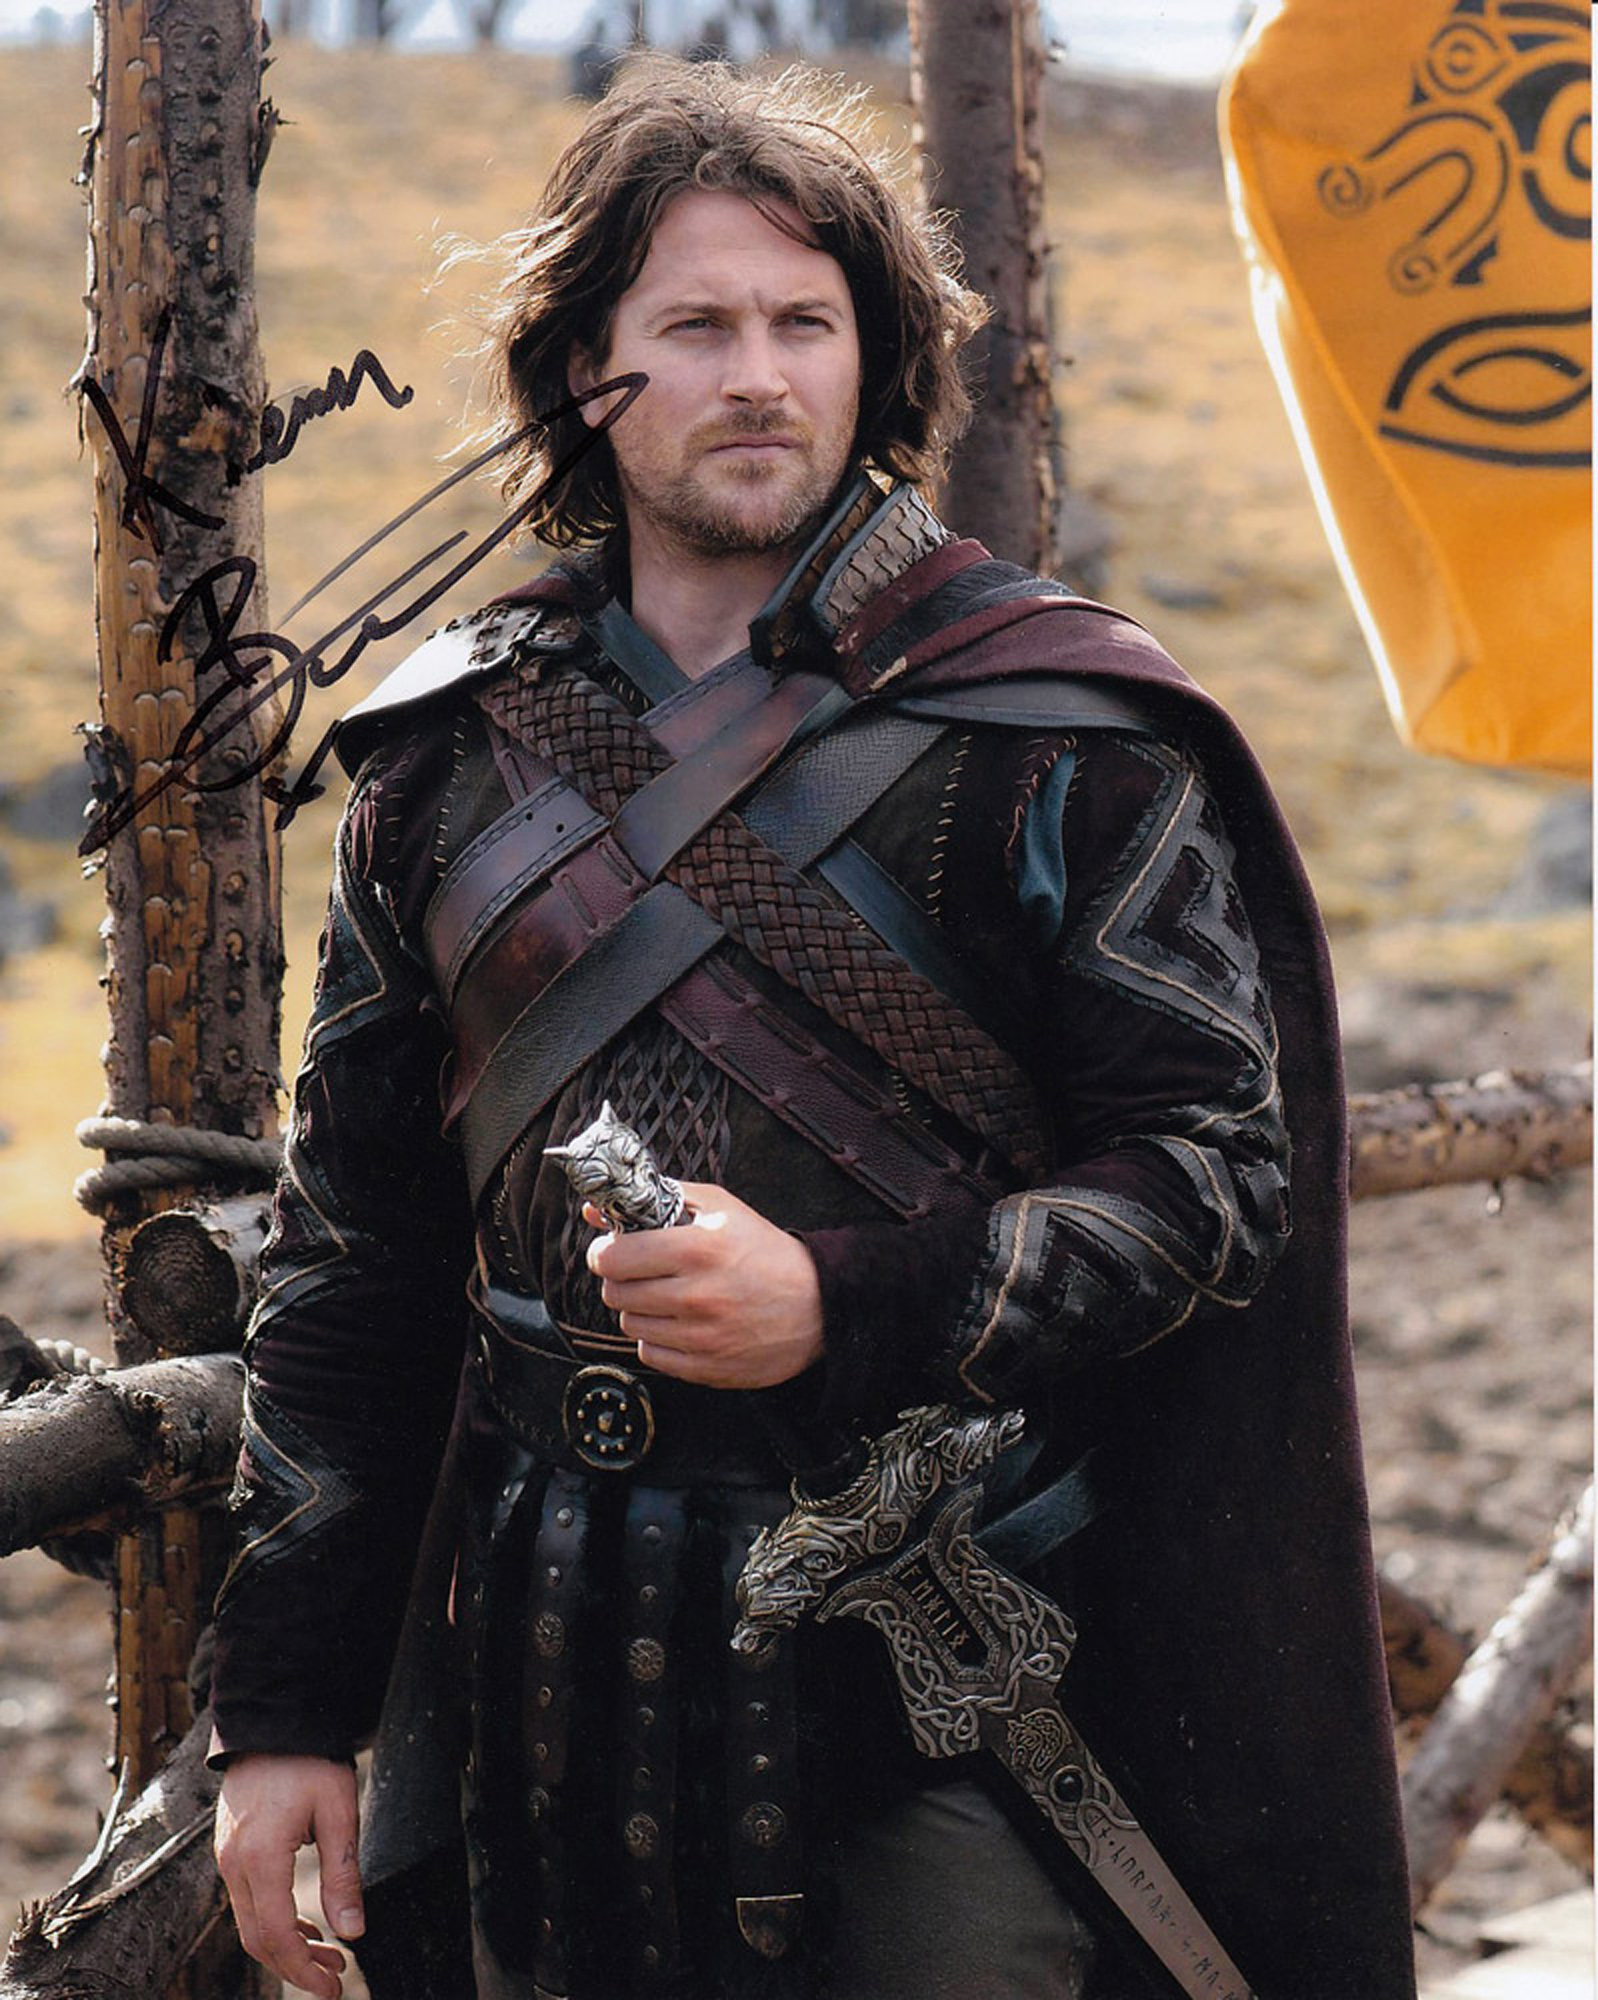 Blowout Sale! Kieran Bew Beowulf hand signed 10x8 photo, This beautiful hand signed photo depicts